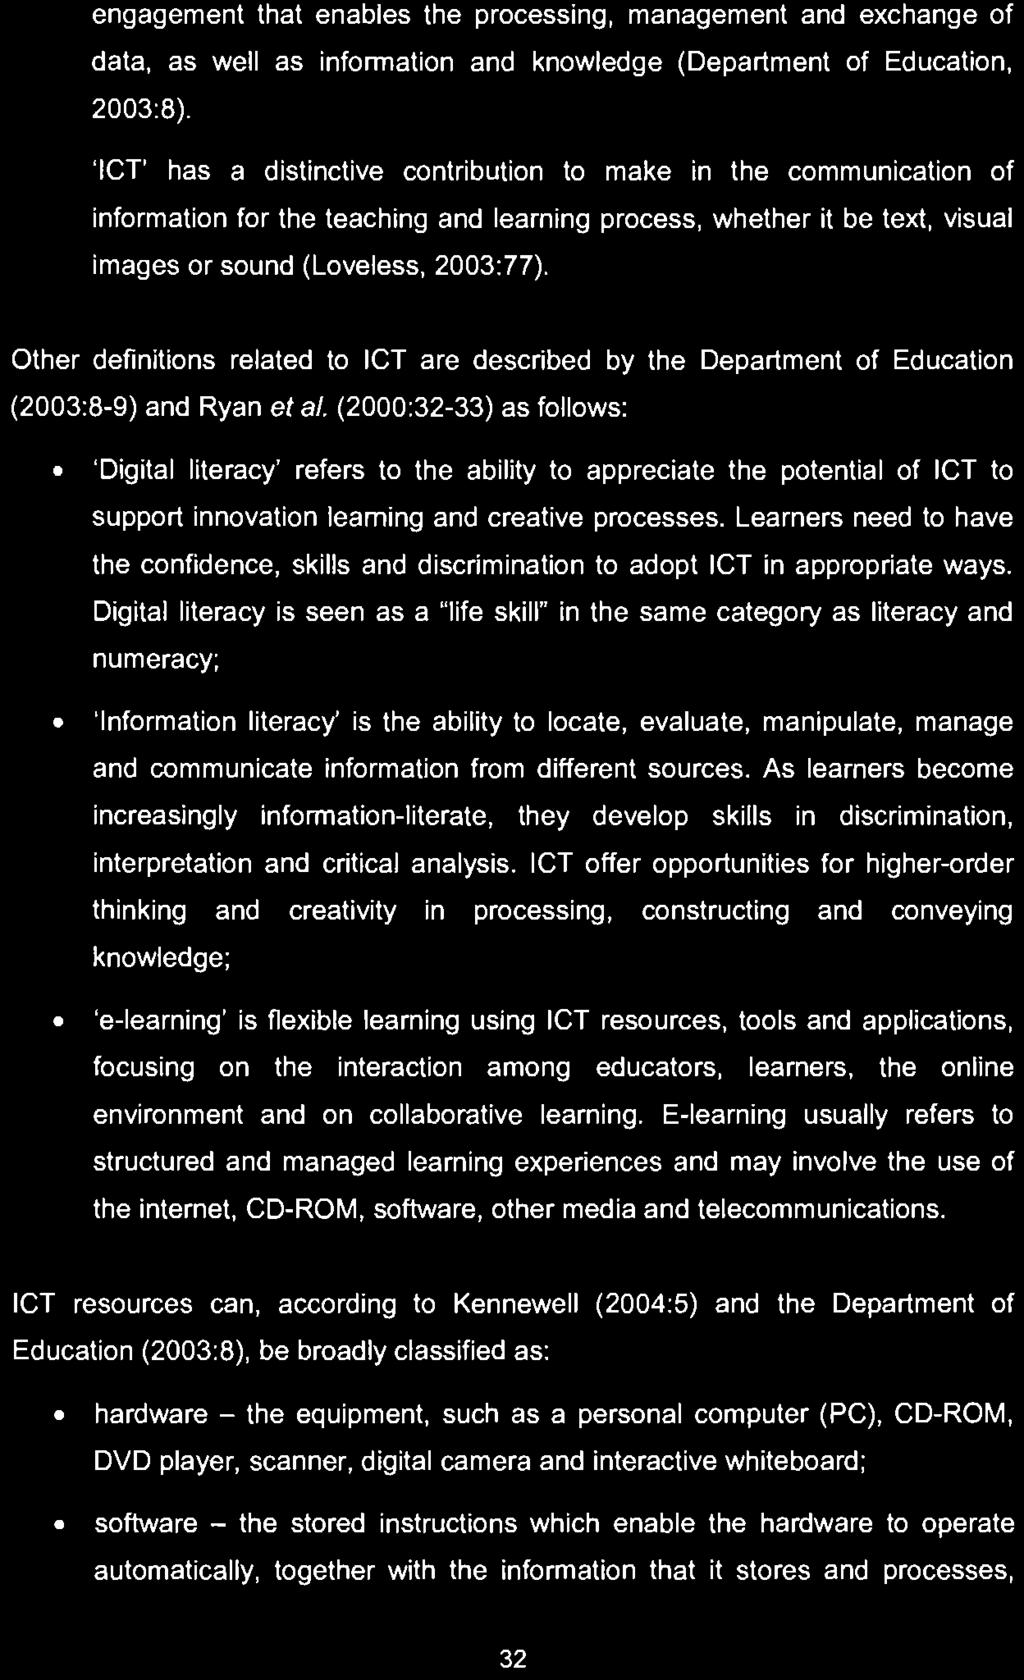 Other definitions related to ICT are described by the Department of Education (2003:8-9) and Ryan ef a!